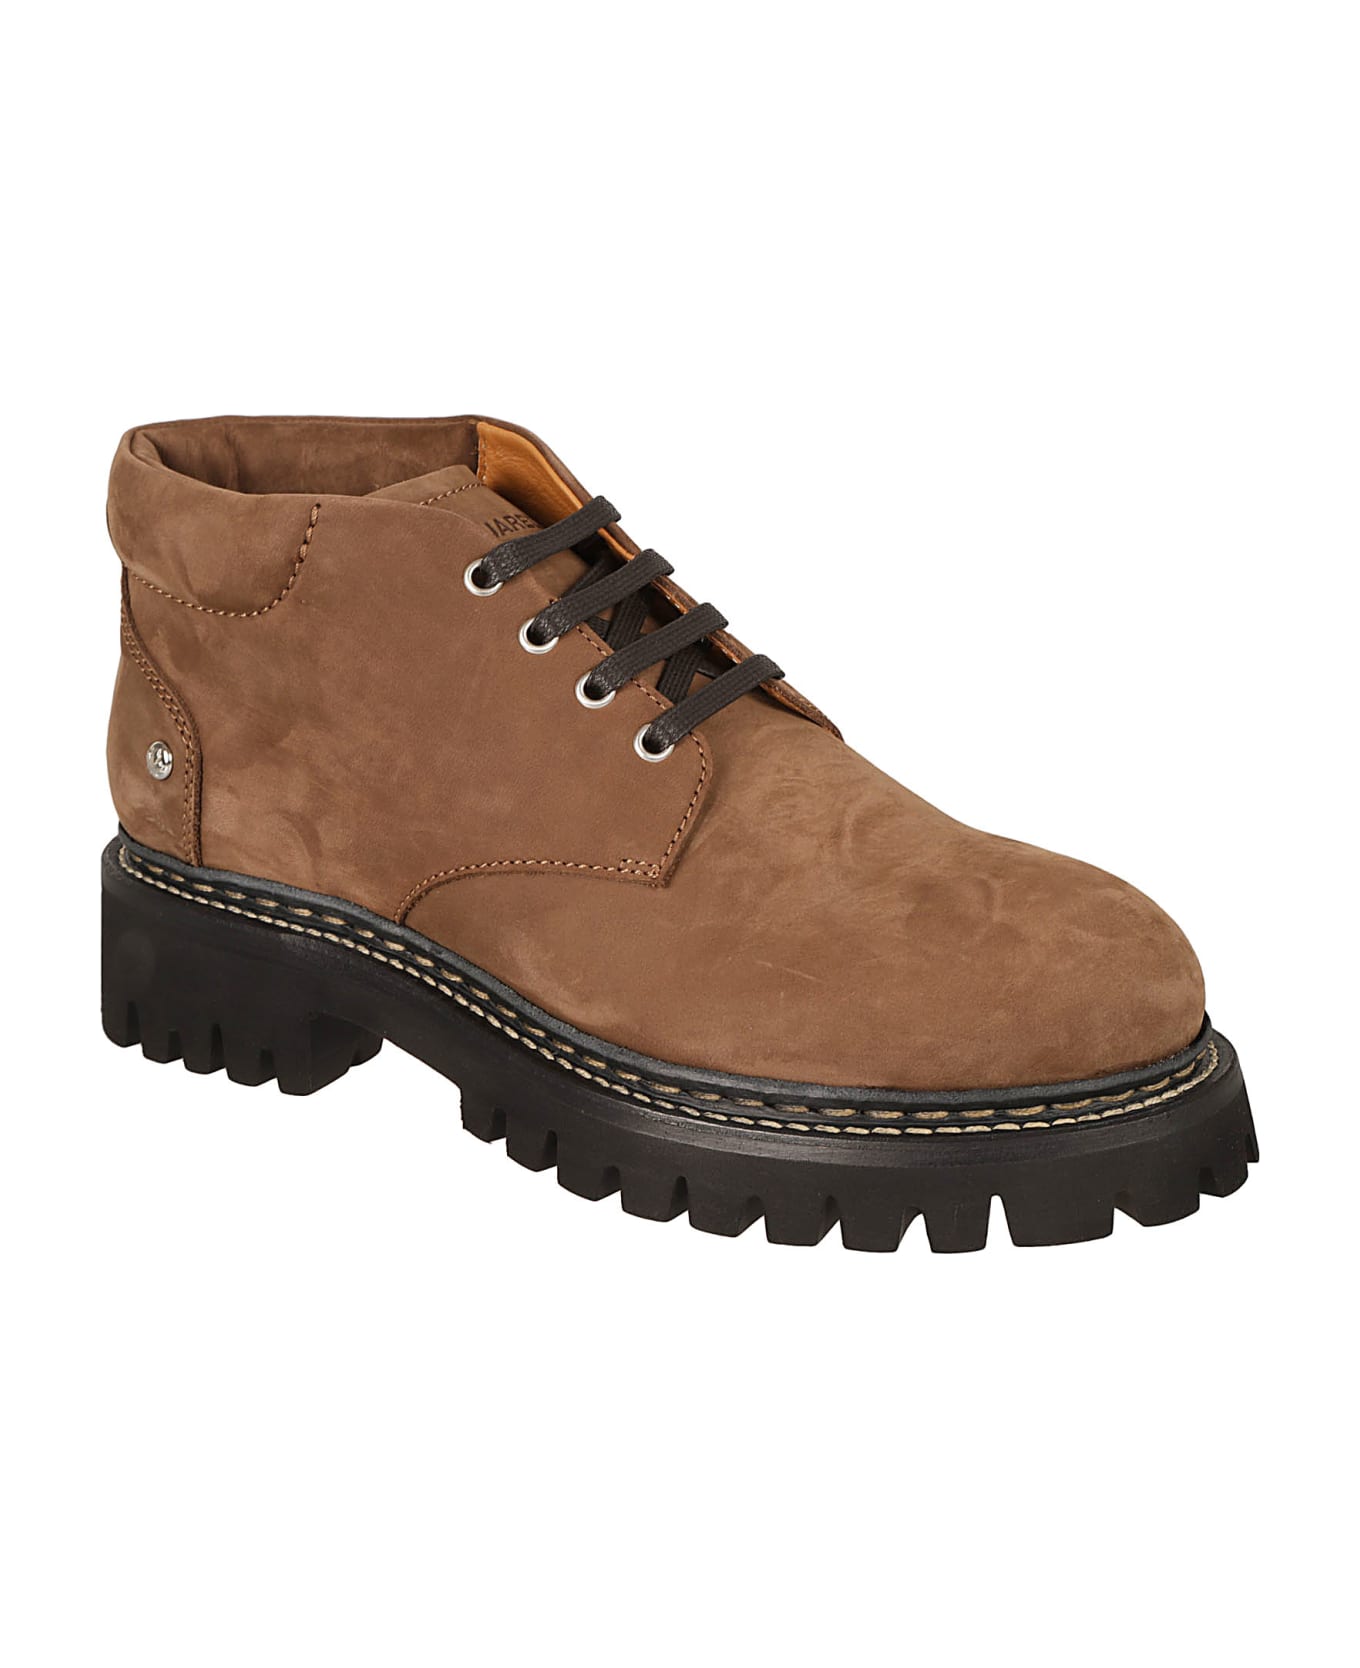 Dsquared2 Desert Canadian Ankle Boots - Dark Brown ブーツ